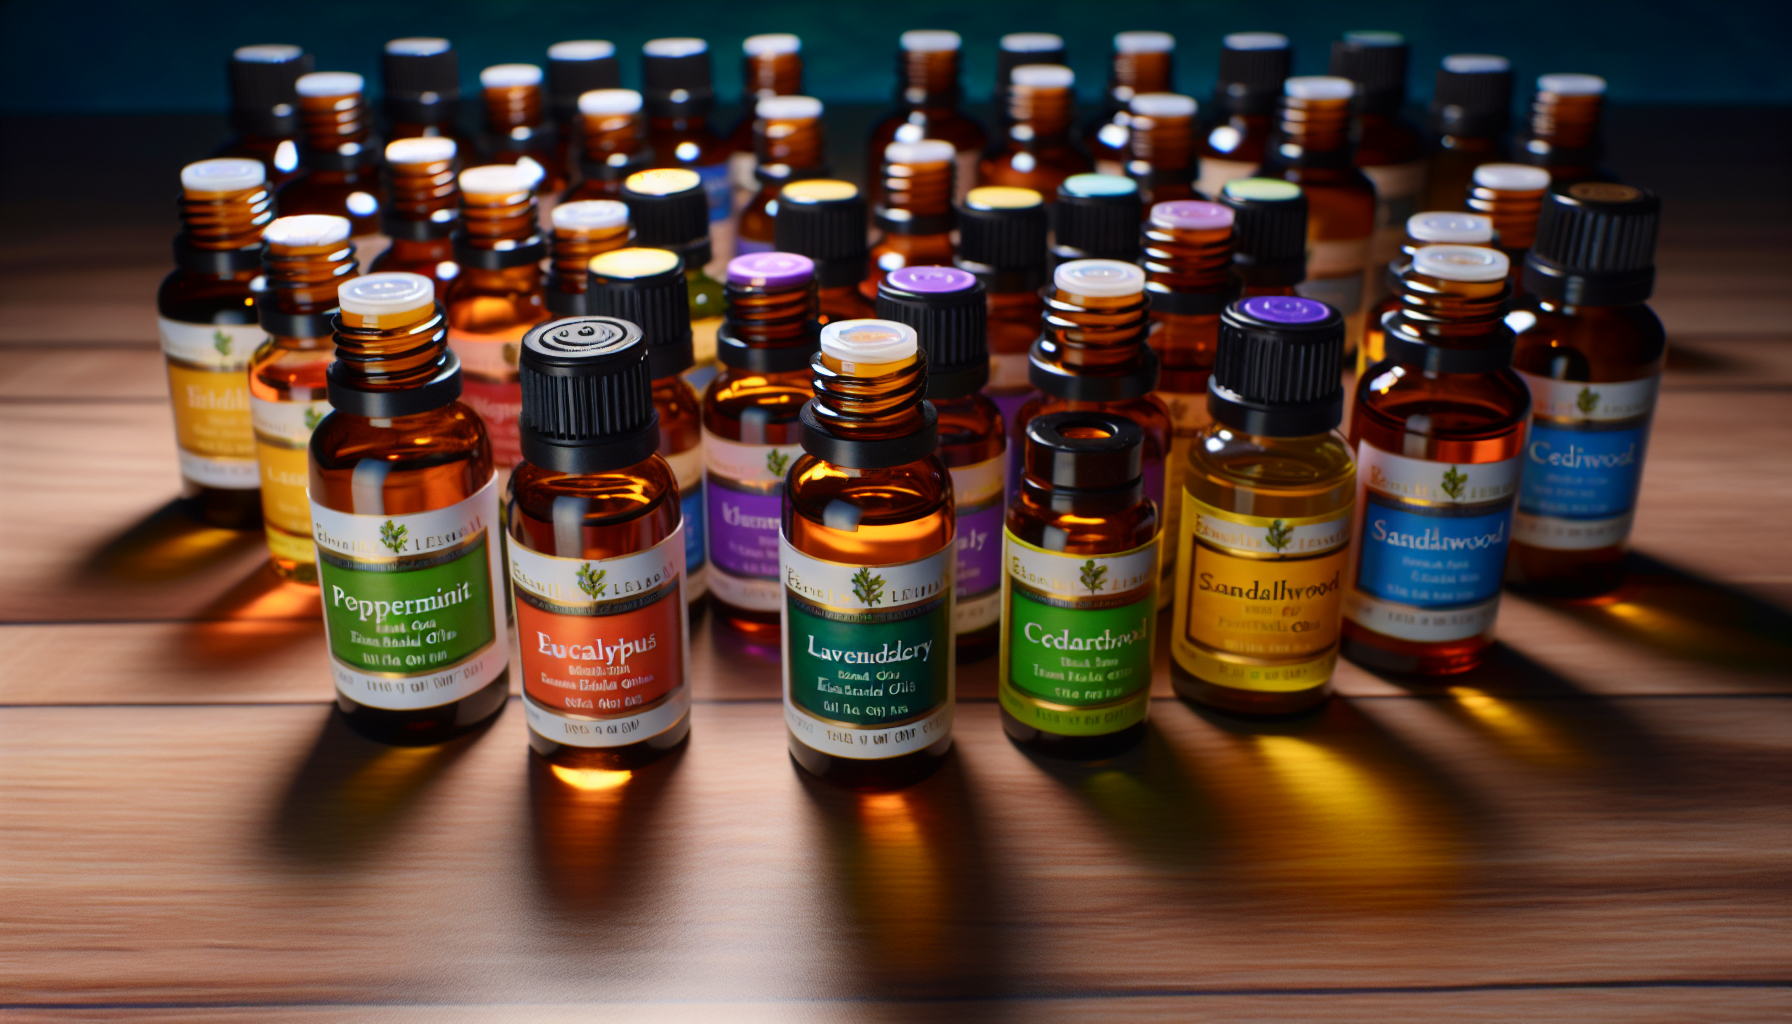 A variety of essential oil bottles with different scents and colors